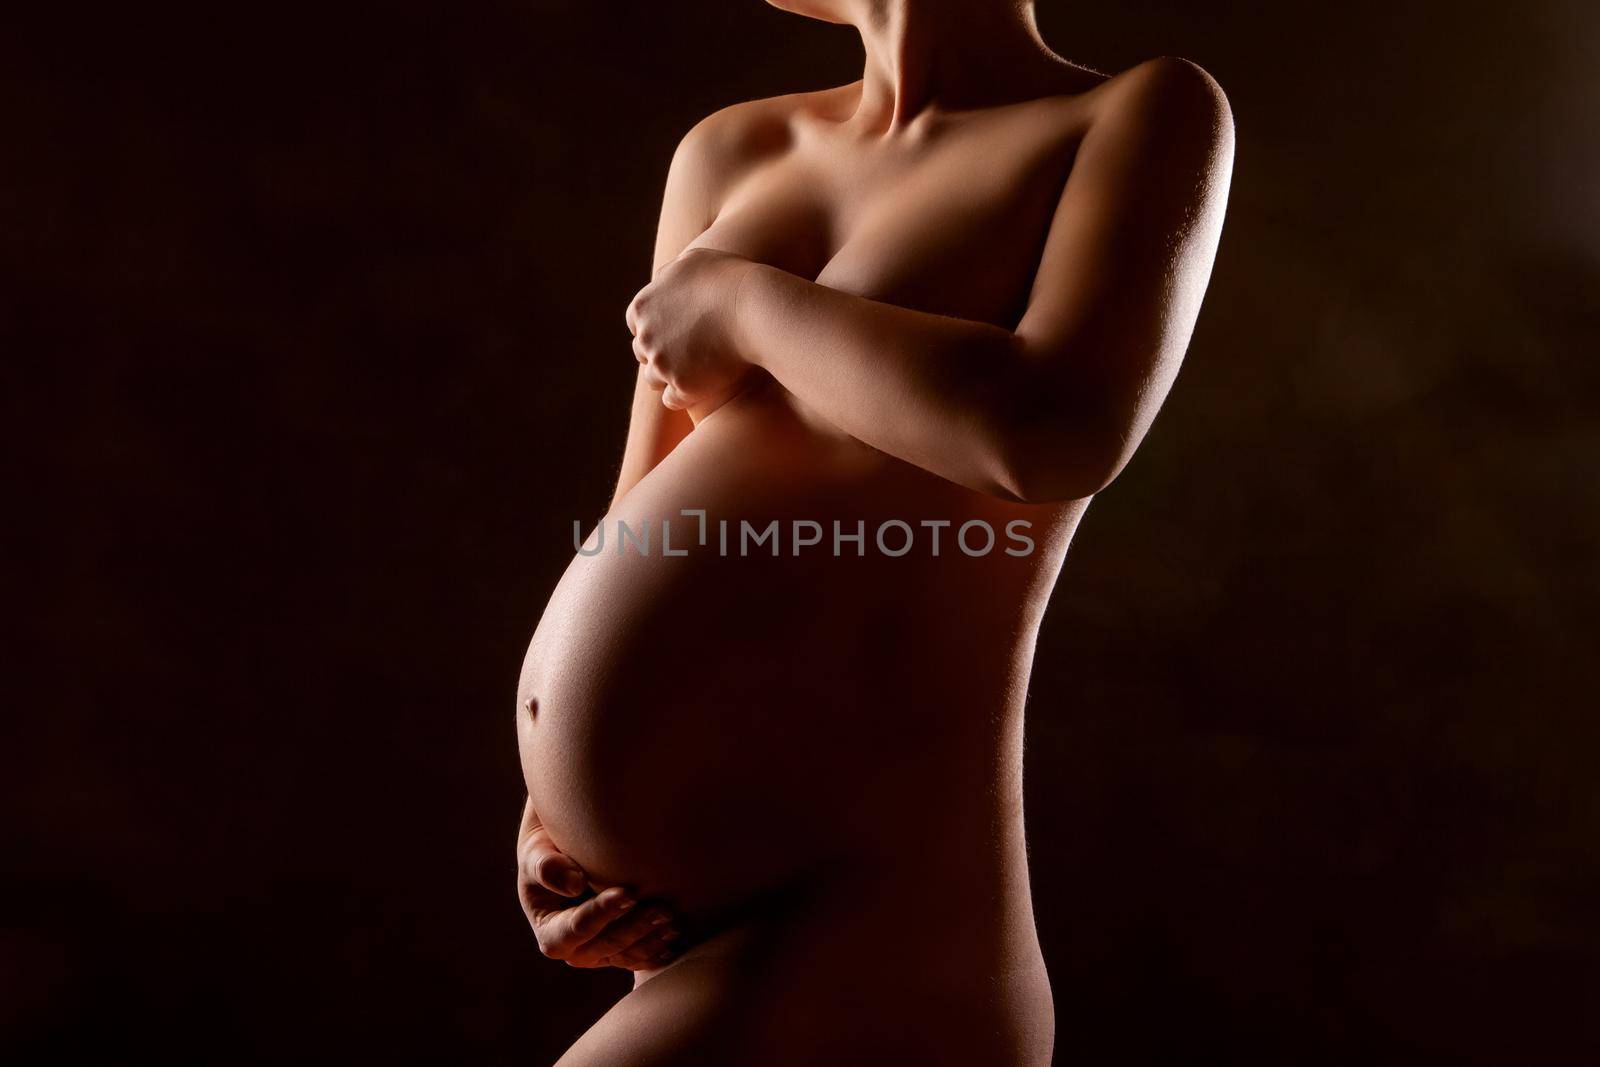 Pregnant woman silhouette over black background by Julenochek